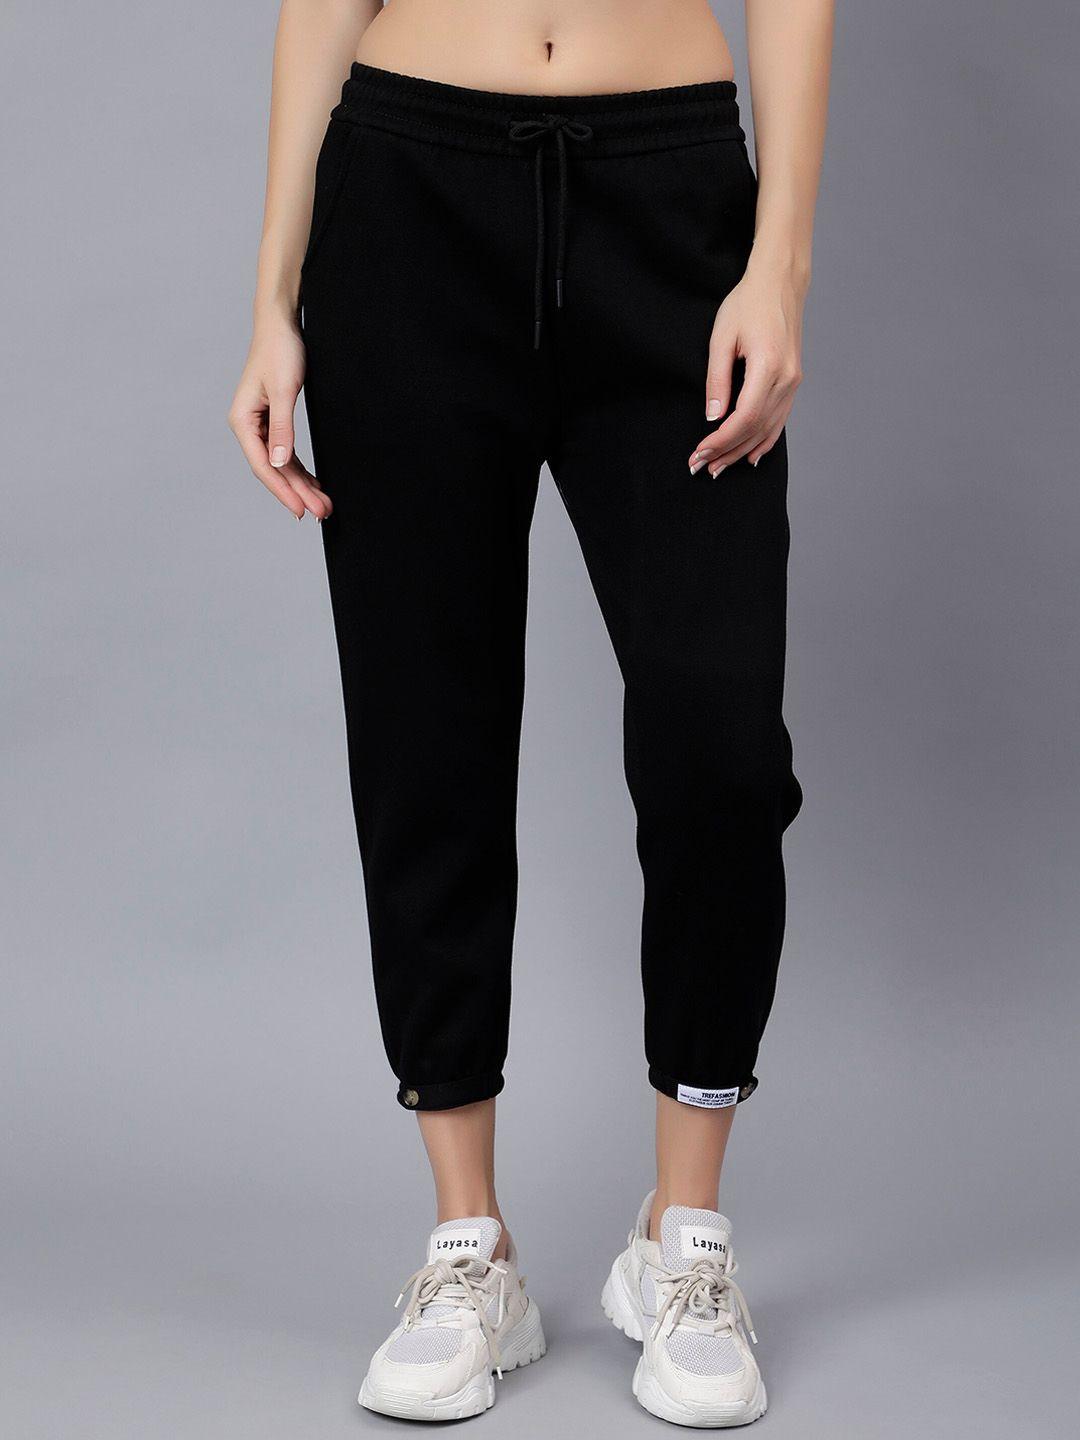 albion women mid rise travel featured pure cotton joggers